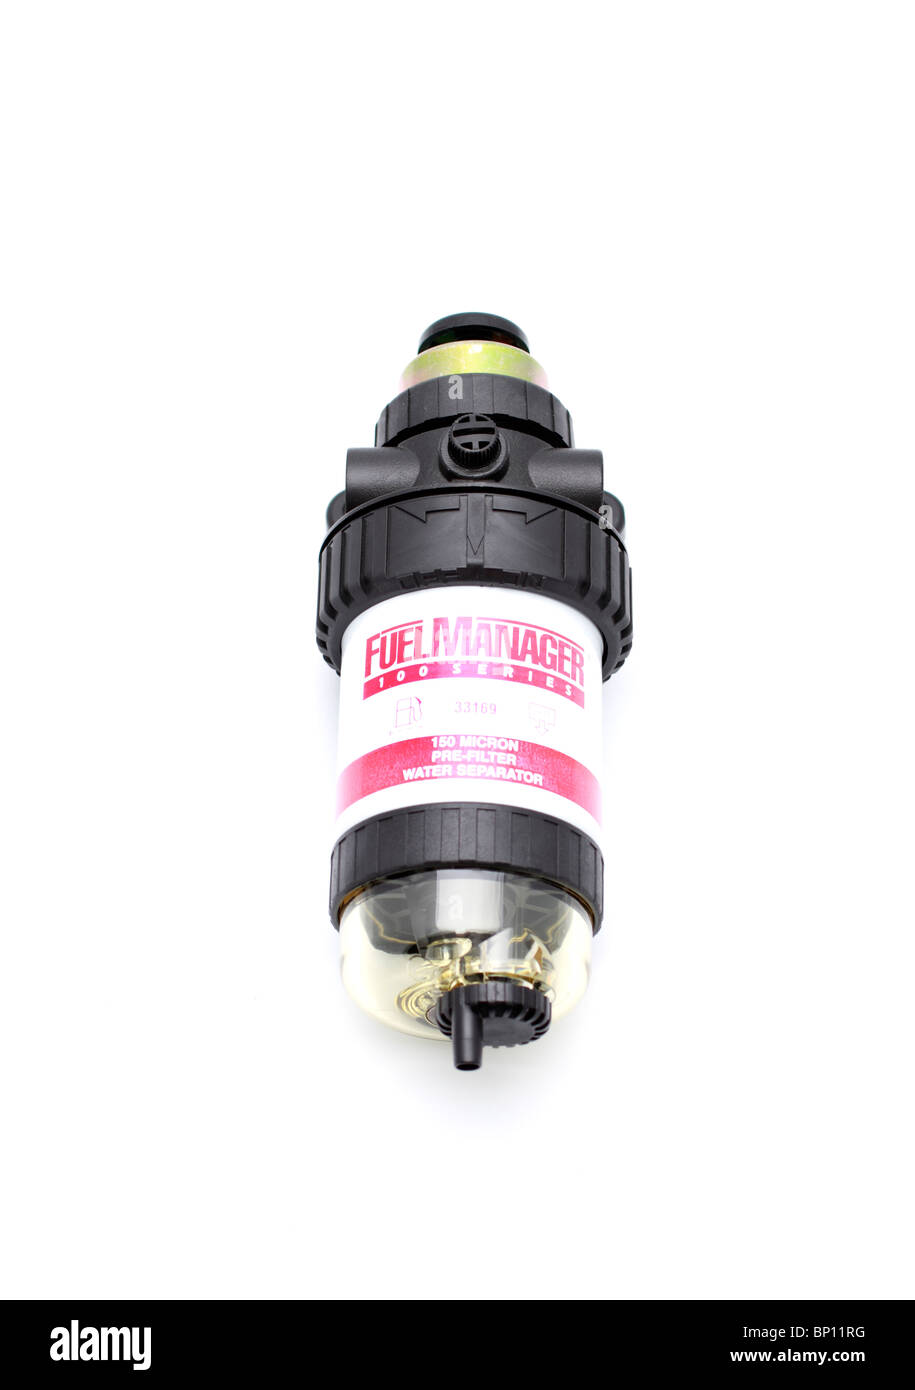 Fuel Manager 100 series diesel fuel filter. 150 micron pre filter water separator Stock Photo